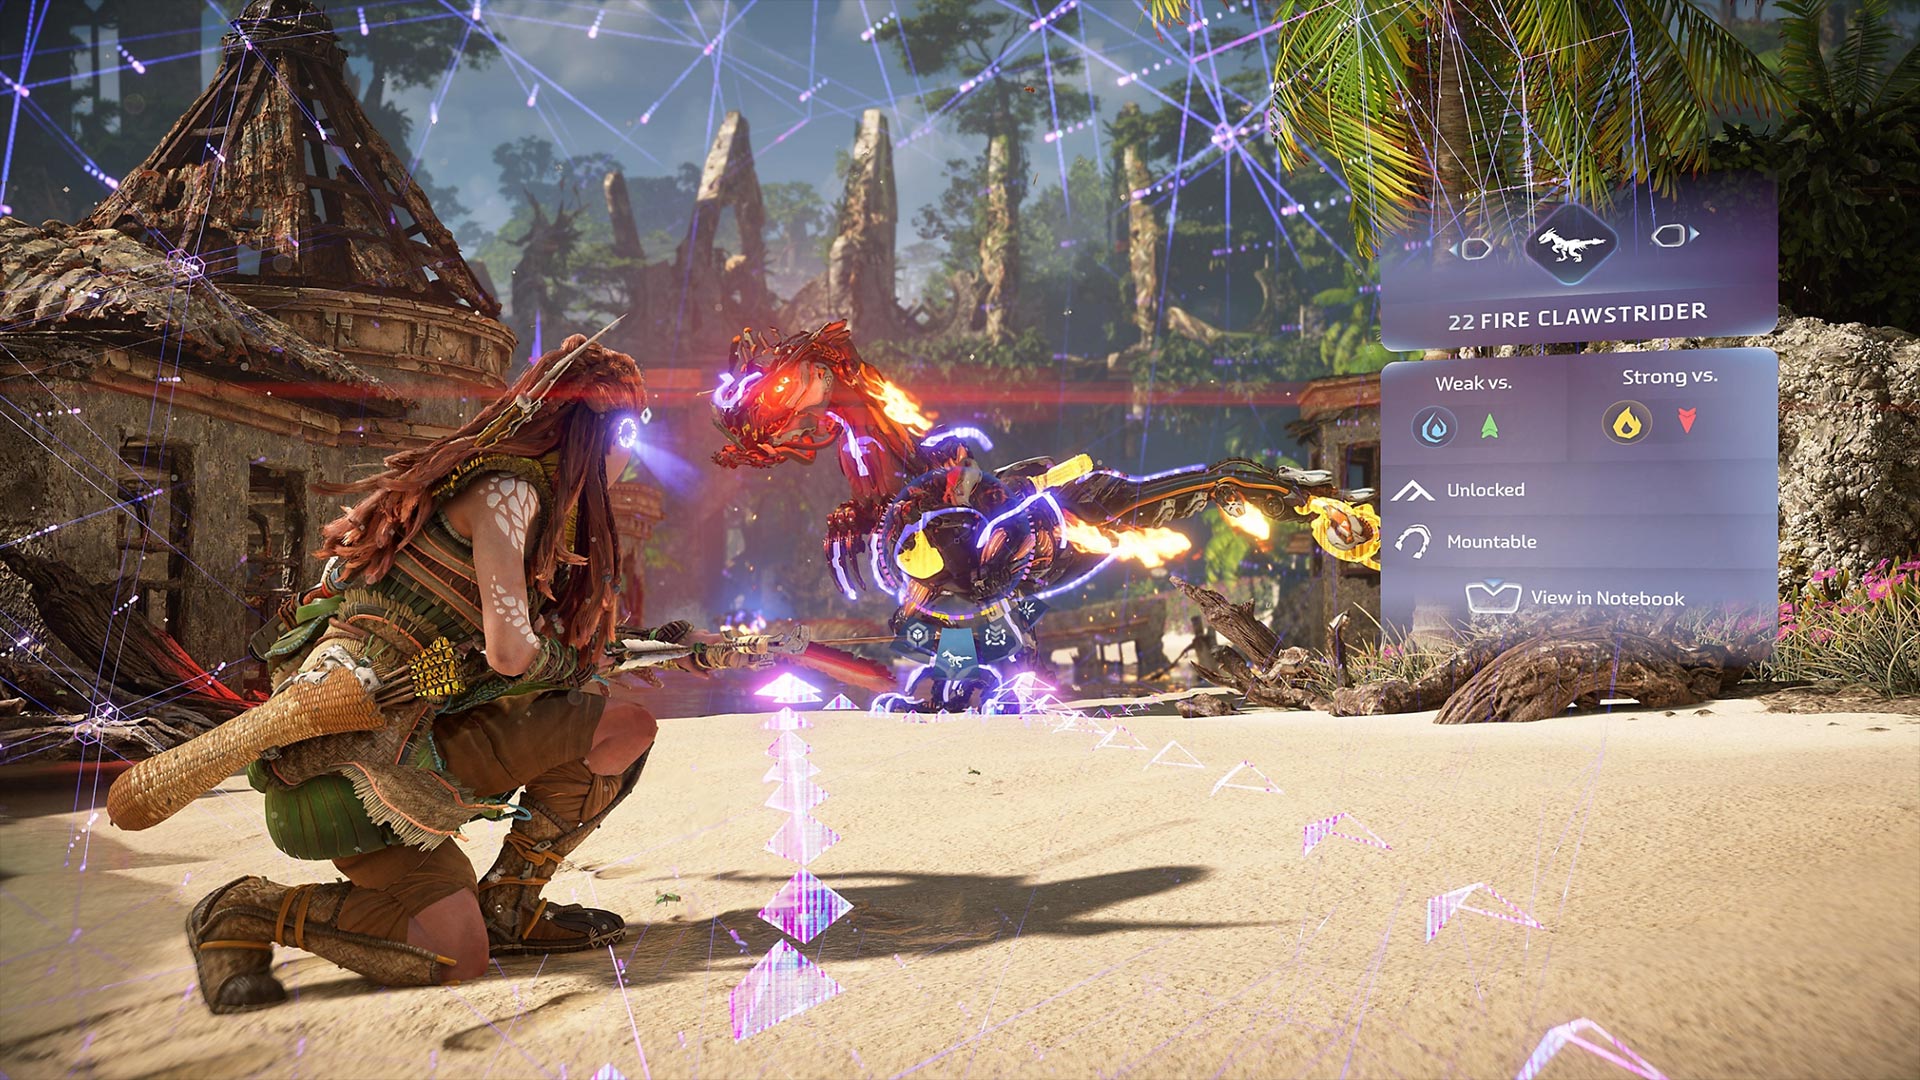 In Horizon Forbidden West, Aloy uses technology to scan a robot enemy for its weaknesses. 